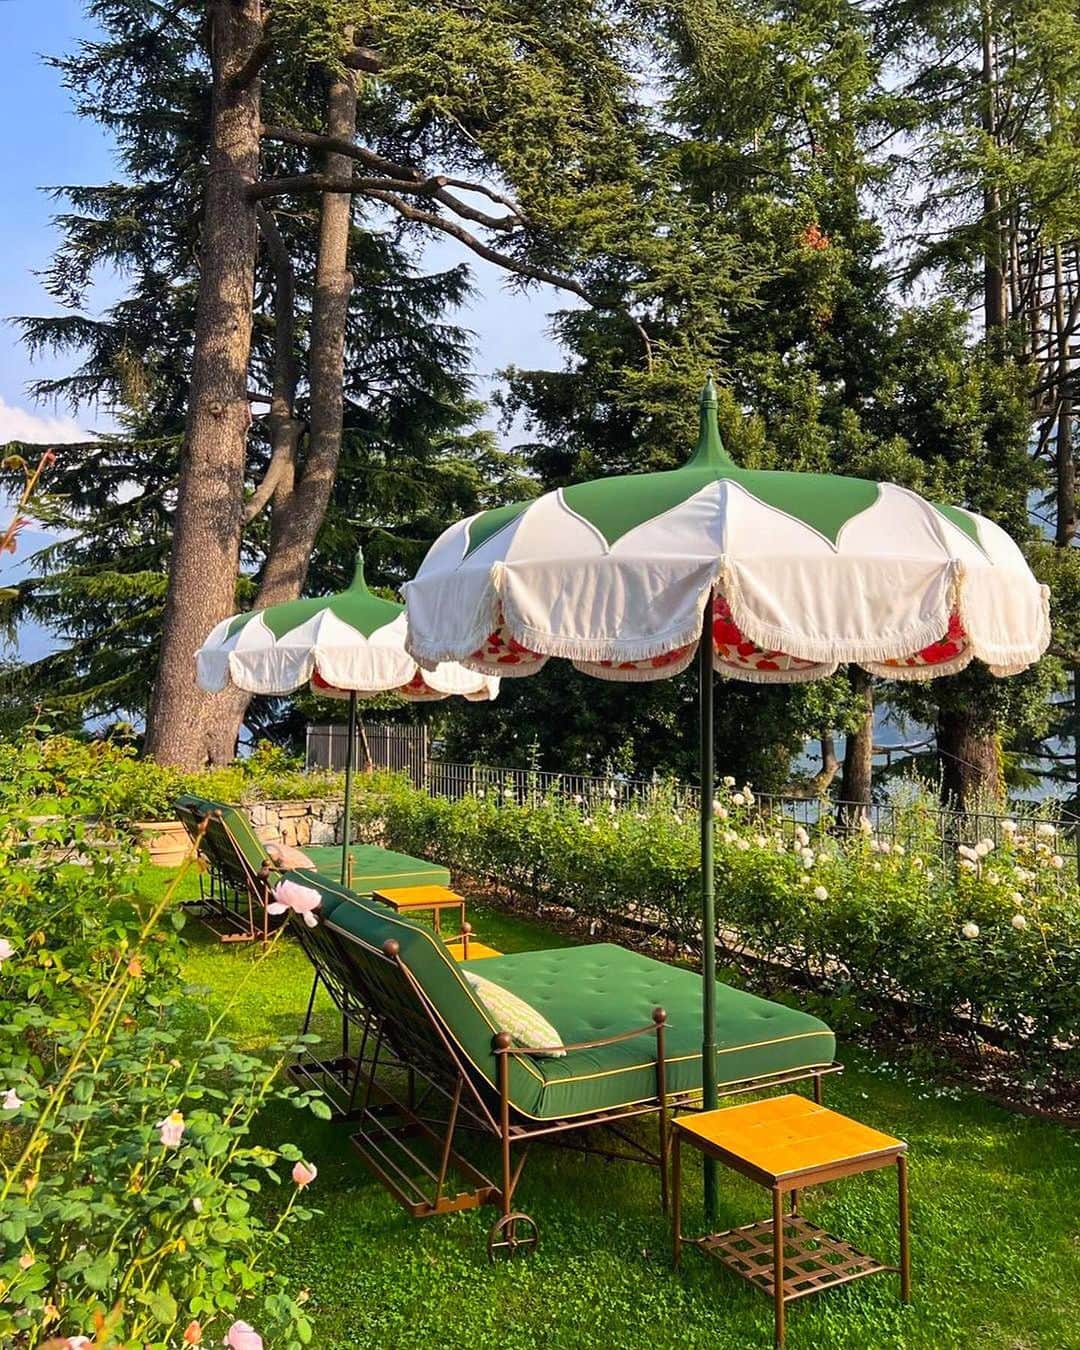 BEAUTIFUL HOTELSのインスタグラム：「@_itsbeautifulhere brings the magic of Passalacqua in Italy to life! 🇮🇹 This lavish 18th-century aristocratic residence, nestled along the shores of Lake Como, has been elegantly reimagined into a one-of-a-kind hotel experience - making it a serene lakeside retreat where history meets luxury. ✨  📽 @_itsbeautifulhere 📍 @passalacqualakecomo, Lake Como, Italy」